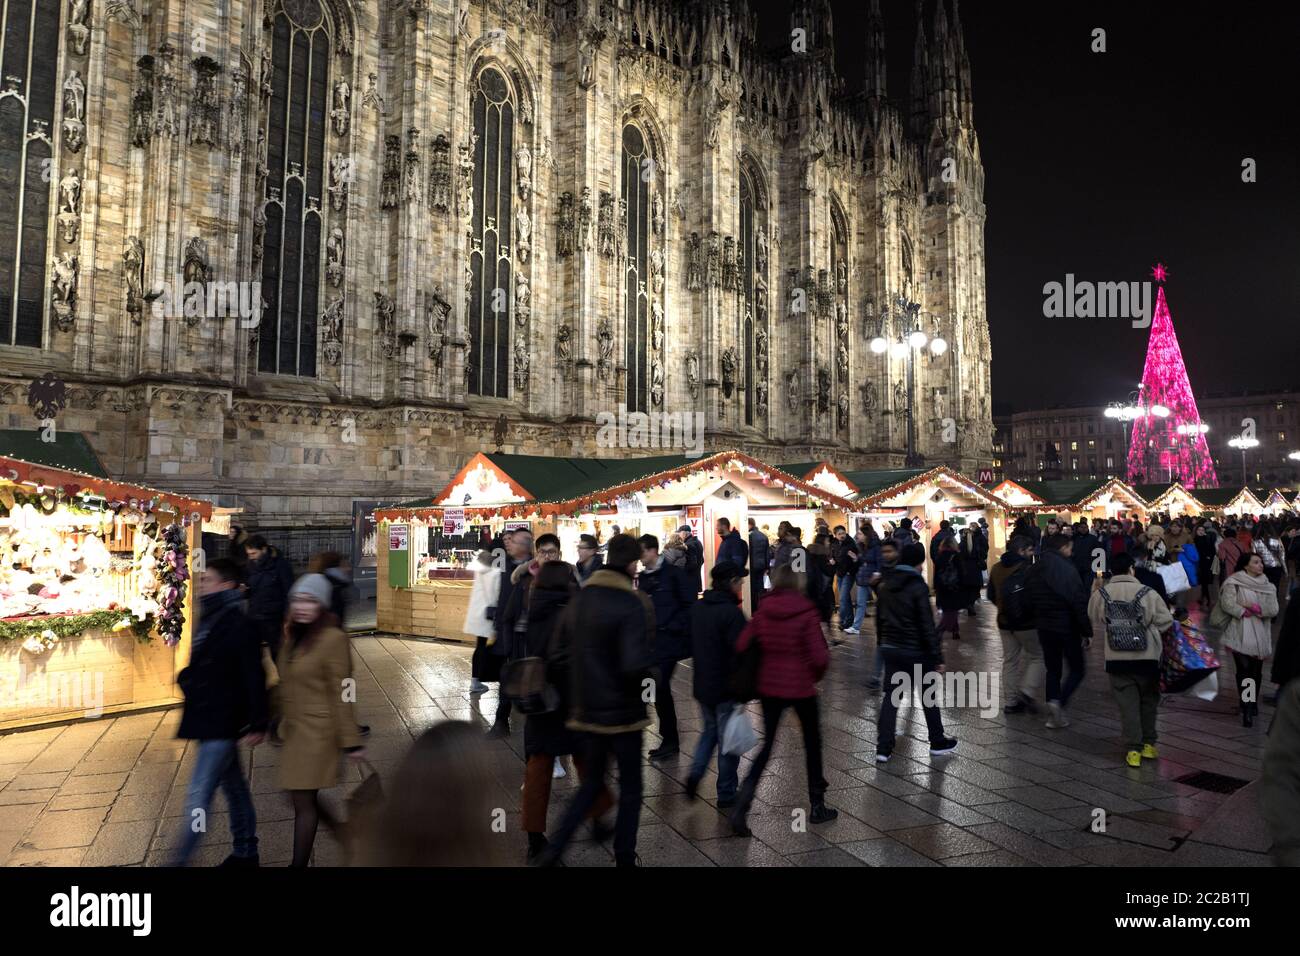 Night Christmas market by the gotici Duomo cathedral of Milan, Italy. Stock Photo